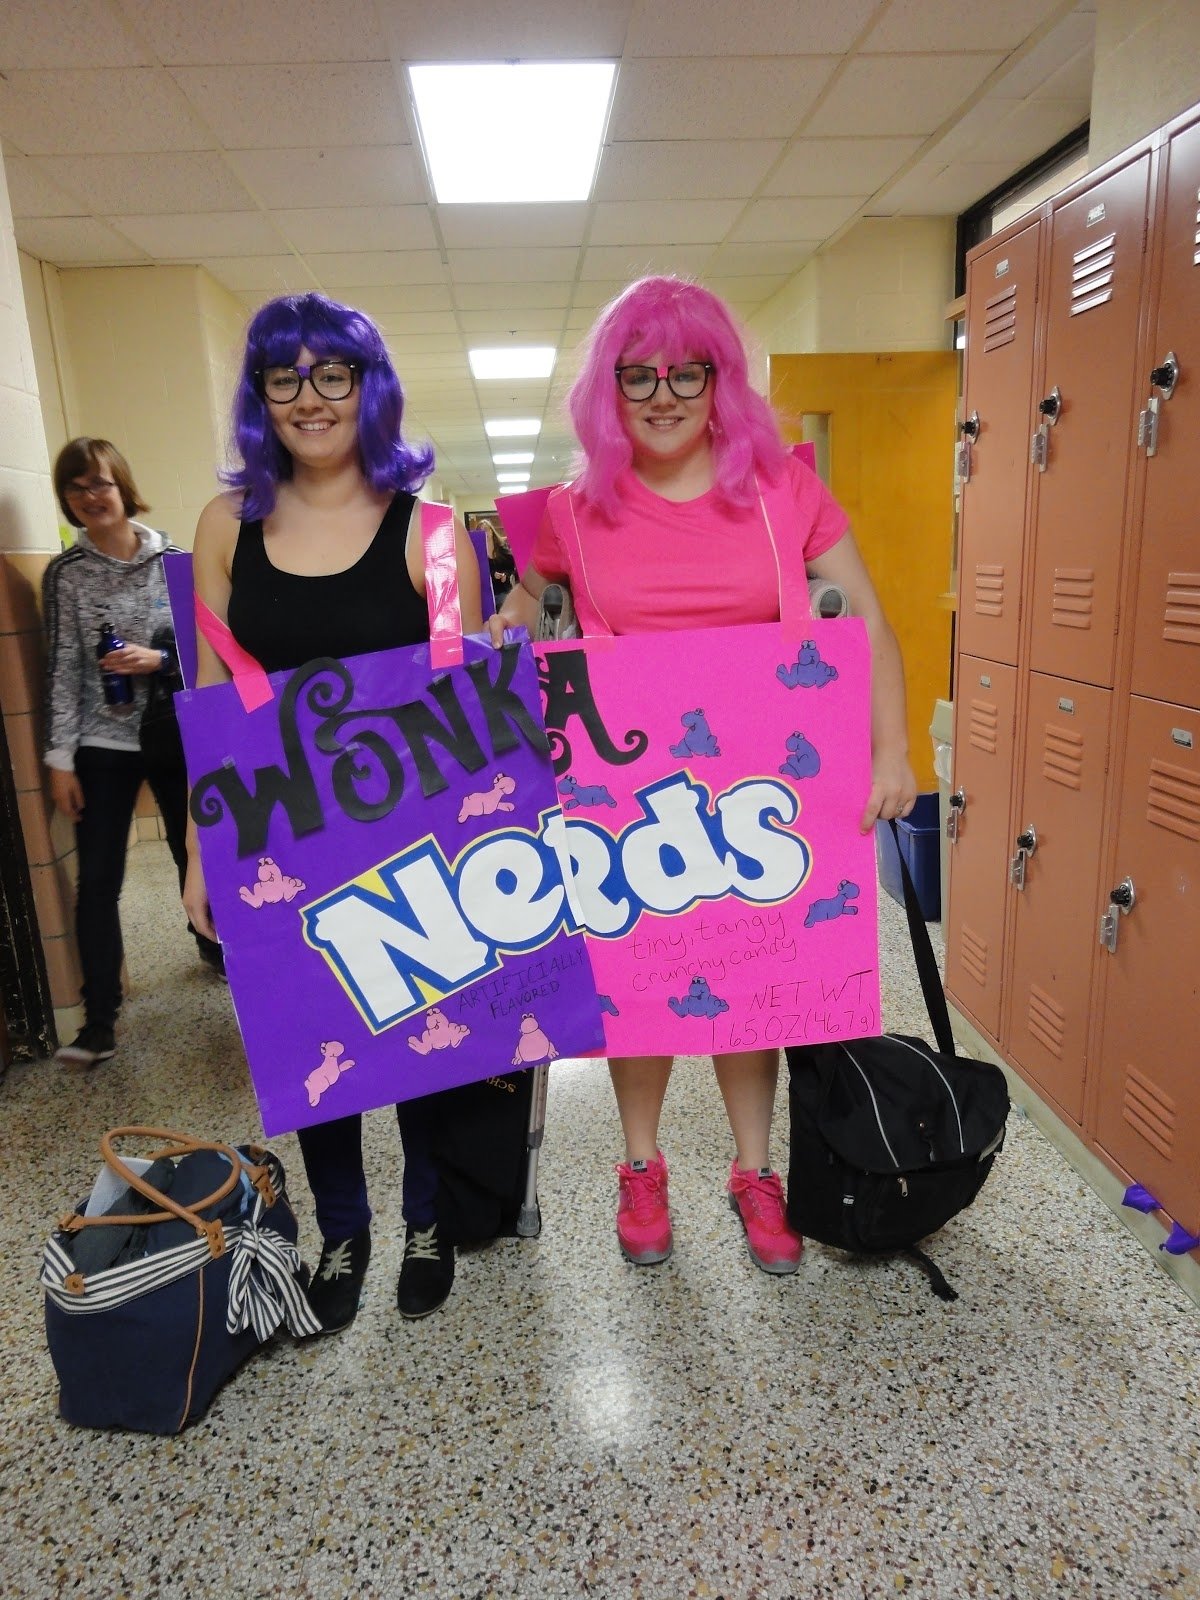 10 Attractive Ideas For Twin Day At School gapp 2012 first homecoming costumes monday twin day 1 2022